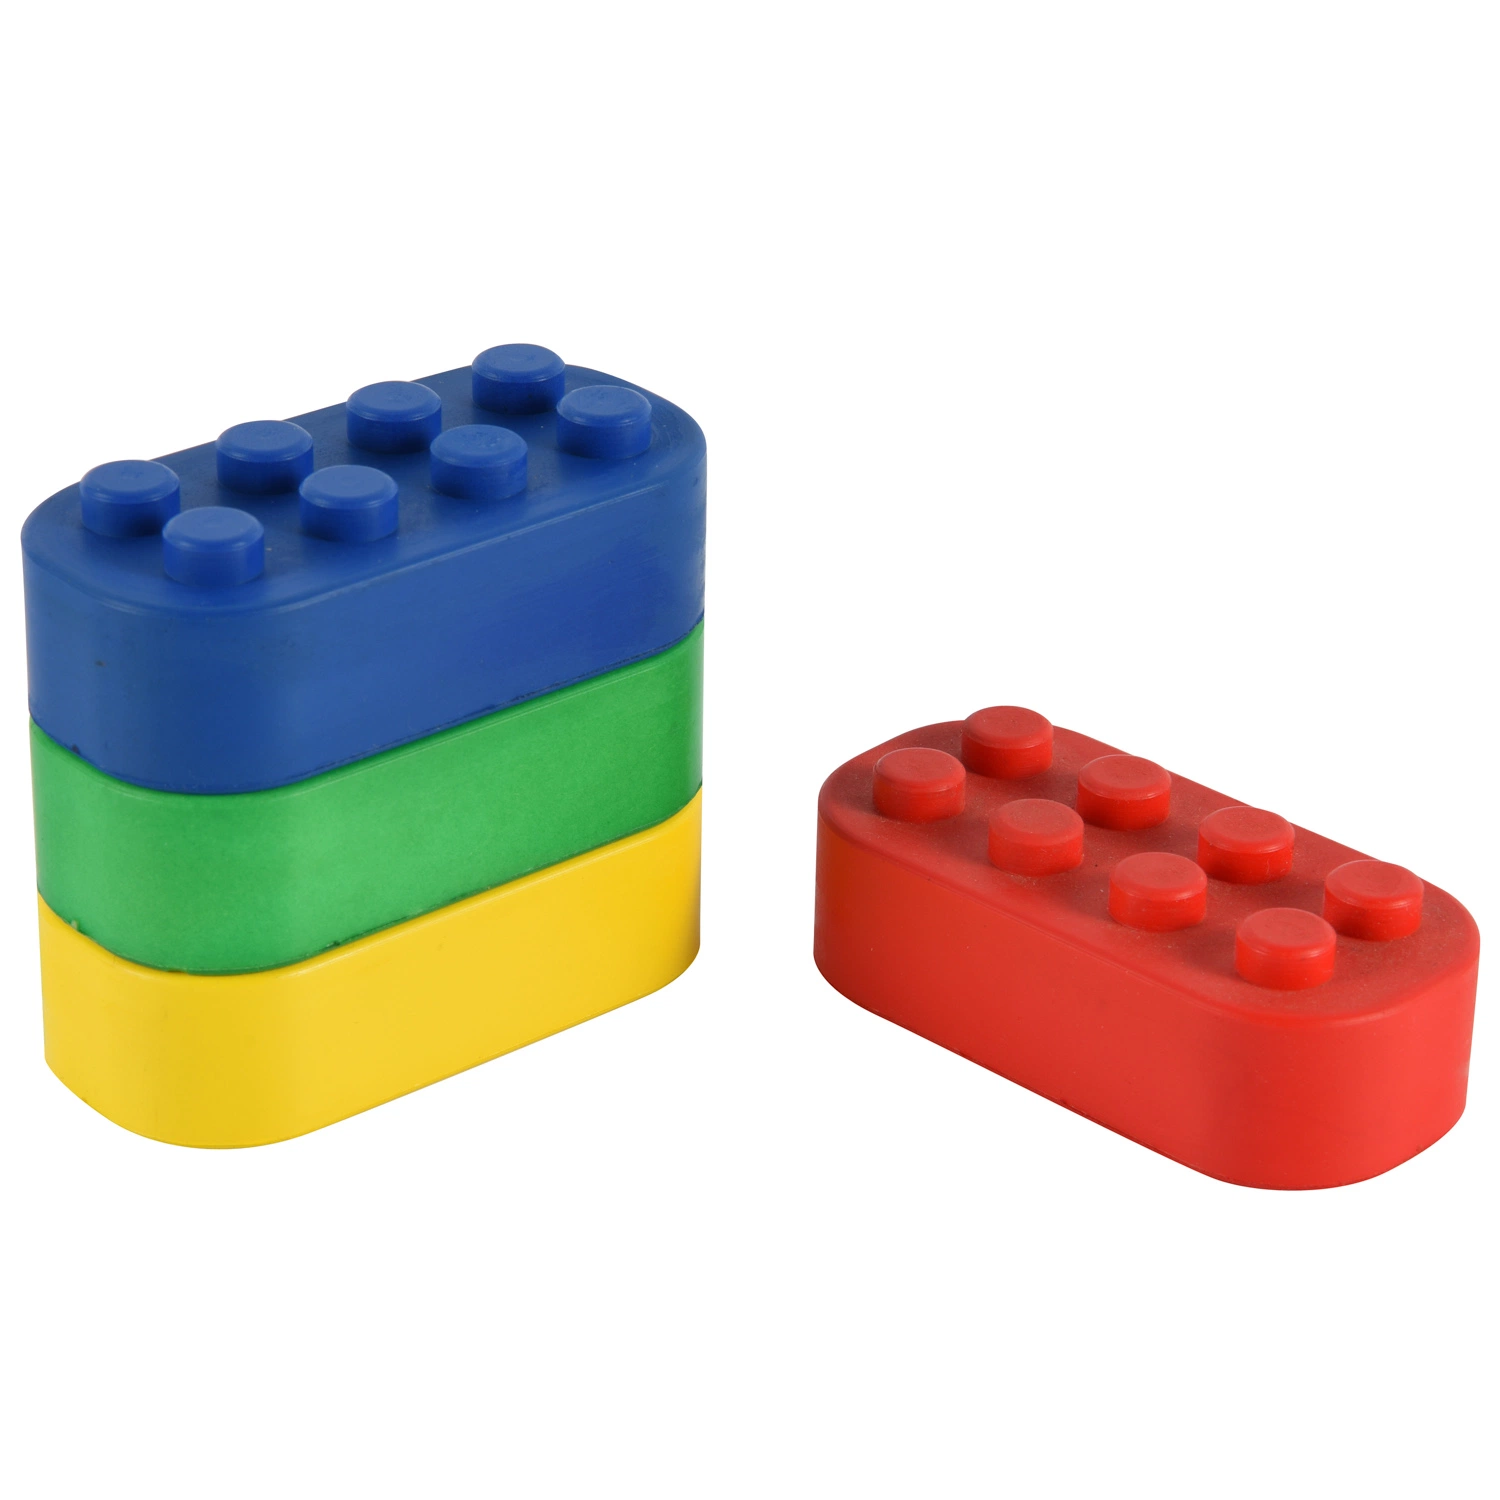 Wholesale Toy Bricks with Round Corners PU Foam Squeeze Building Blocks Stress Ball for Children and Adults Funny Party Items Promotional Novelty Toys